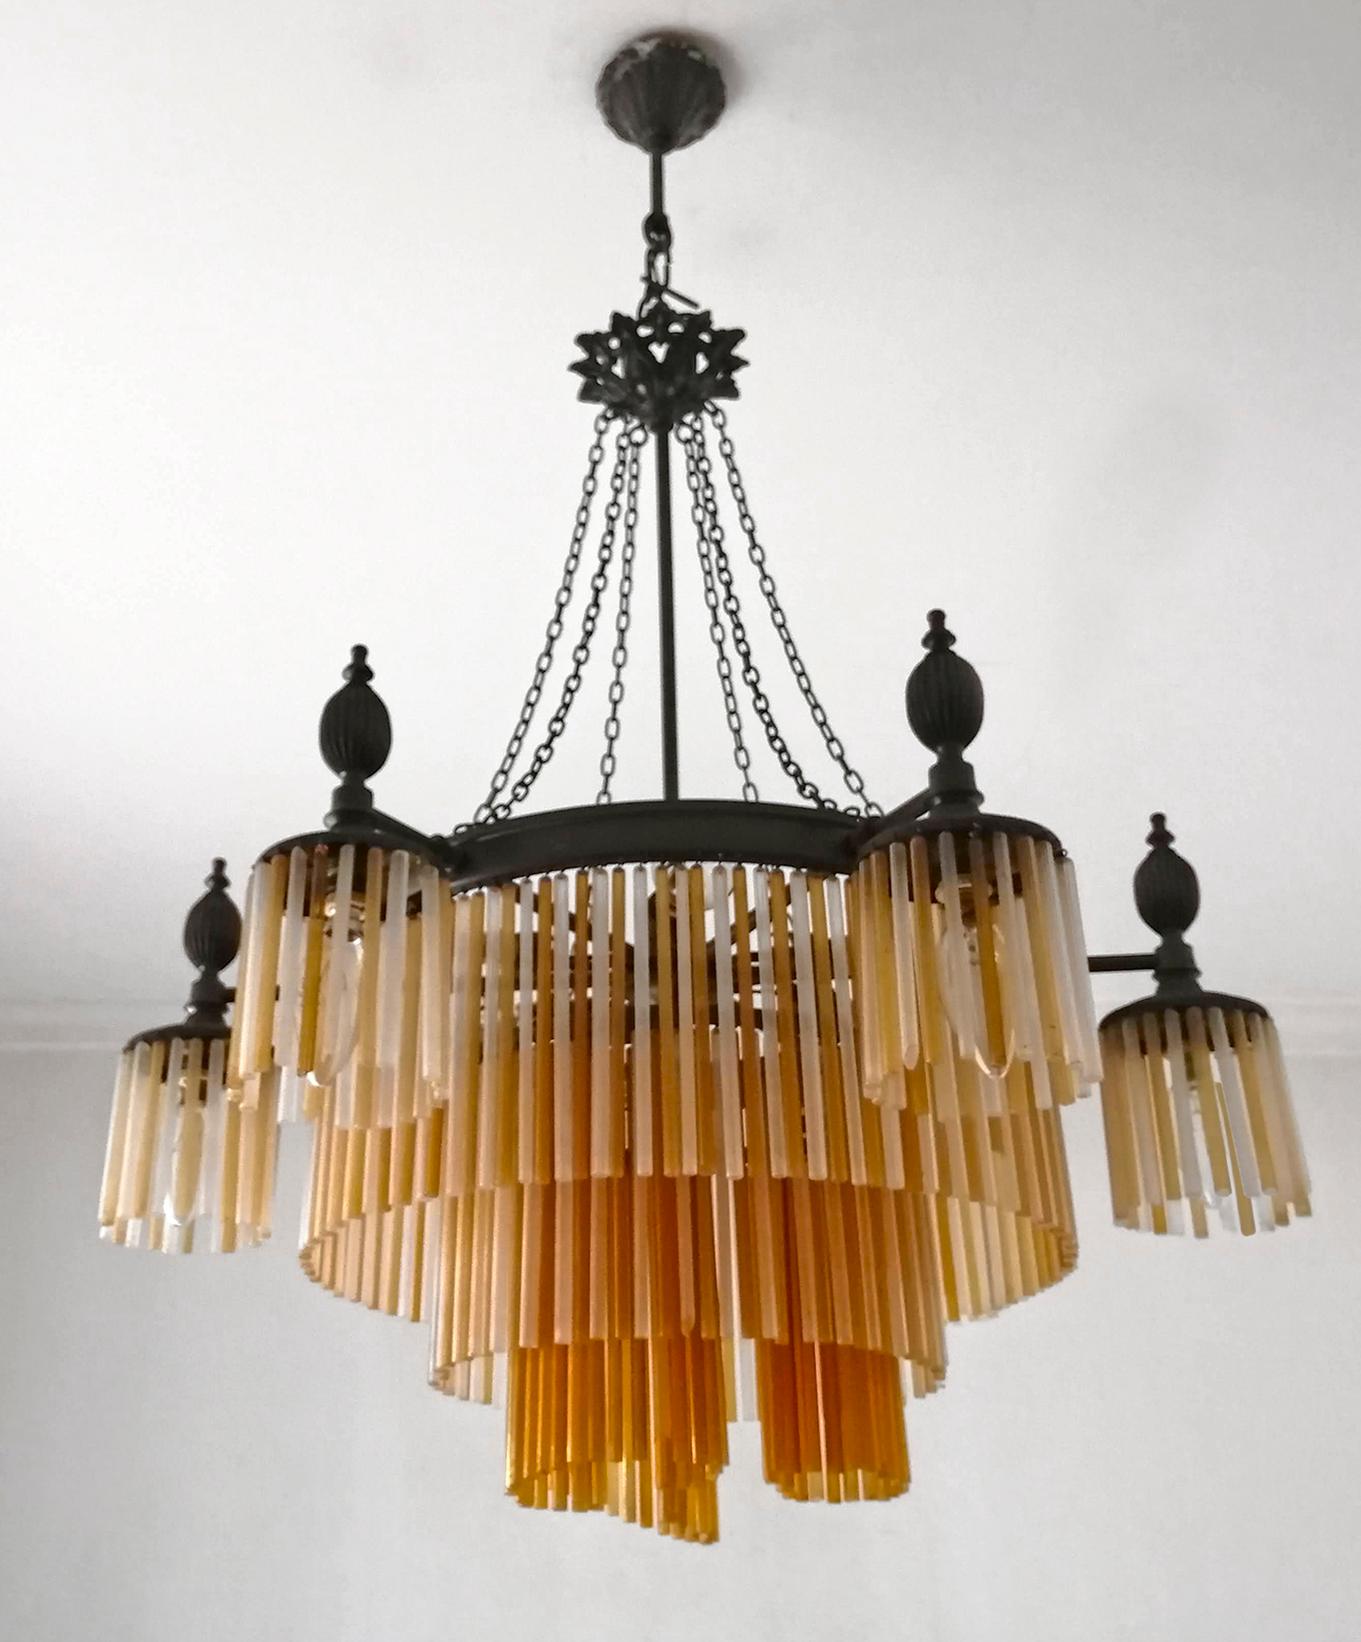 French Art Nouveau and Art Deco Amber and Clear Glass Straws 12-Light Chandelier In Good Condition For Sale In Coimbra, PT